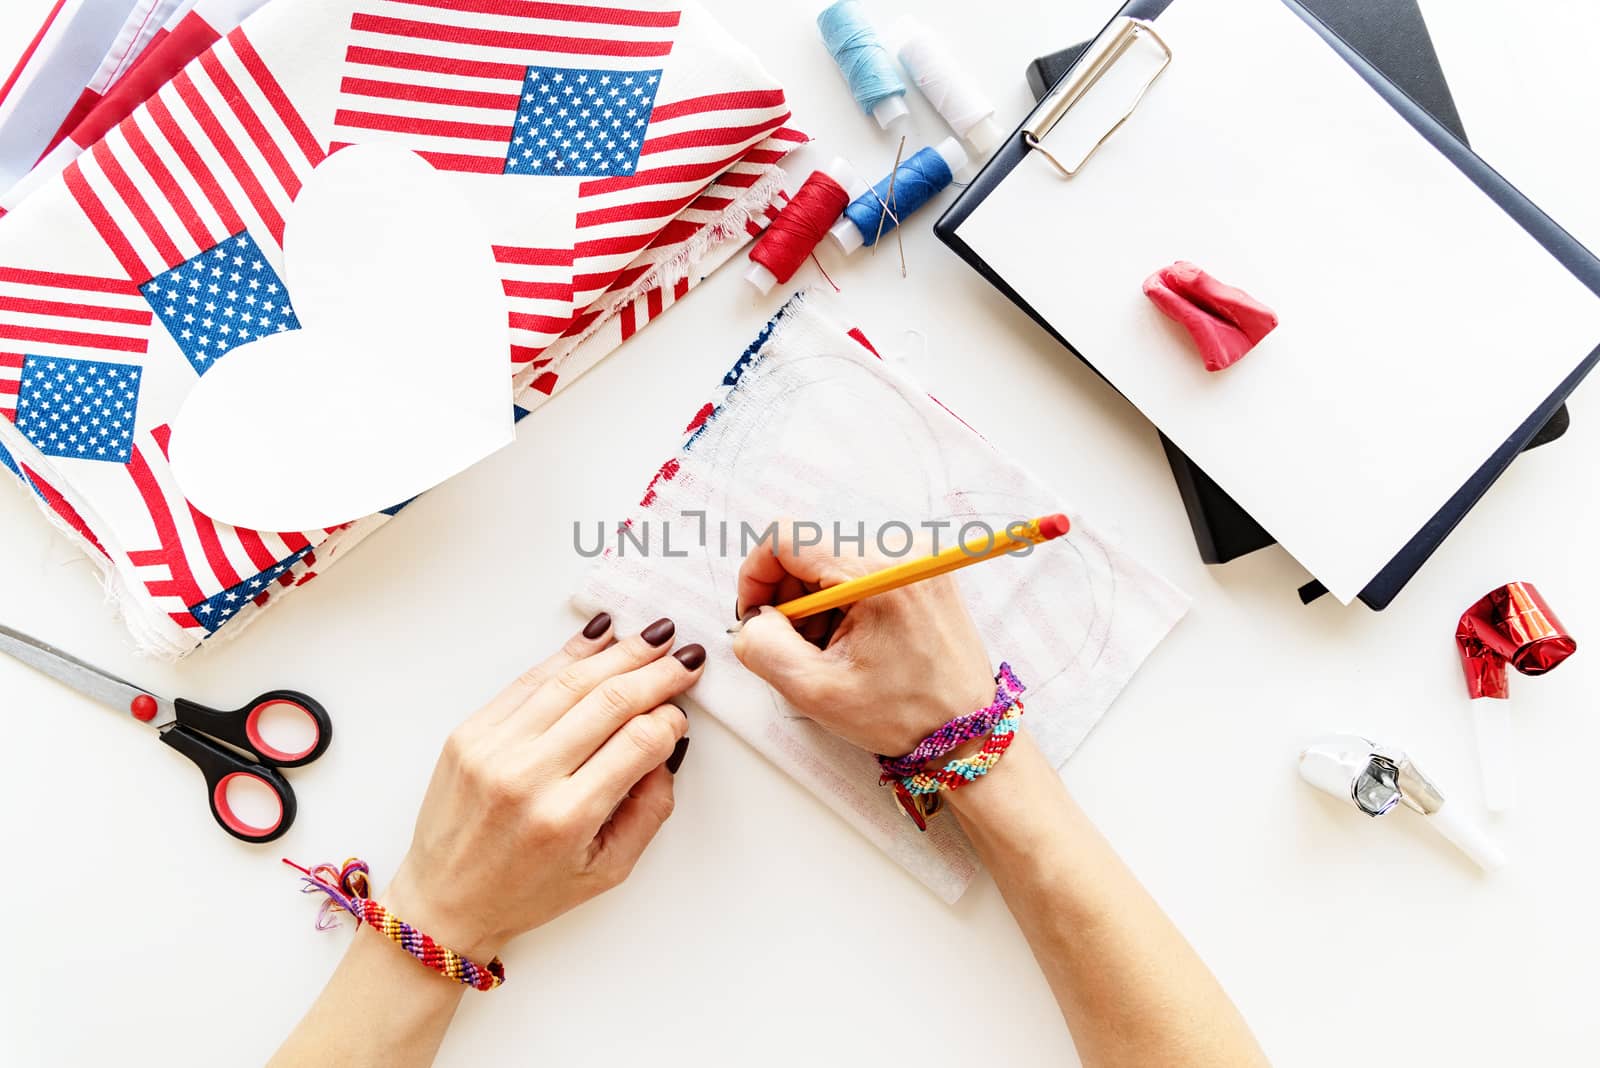 Diy 4th of July step by step needle holder craft. Step 4 - drawing the over measure line by Desperada